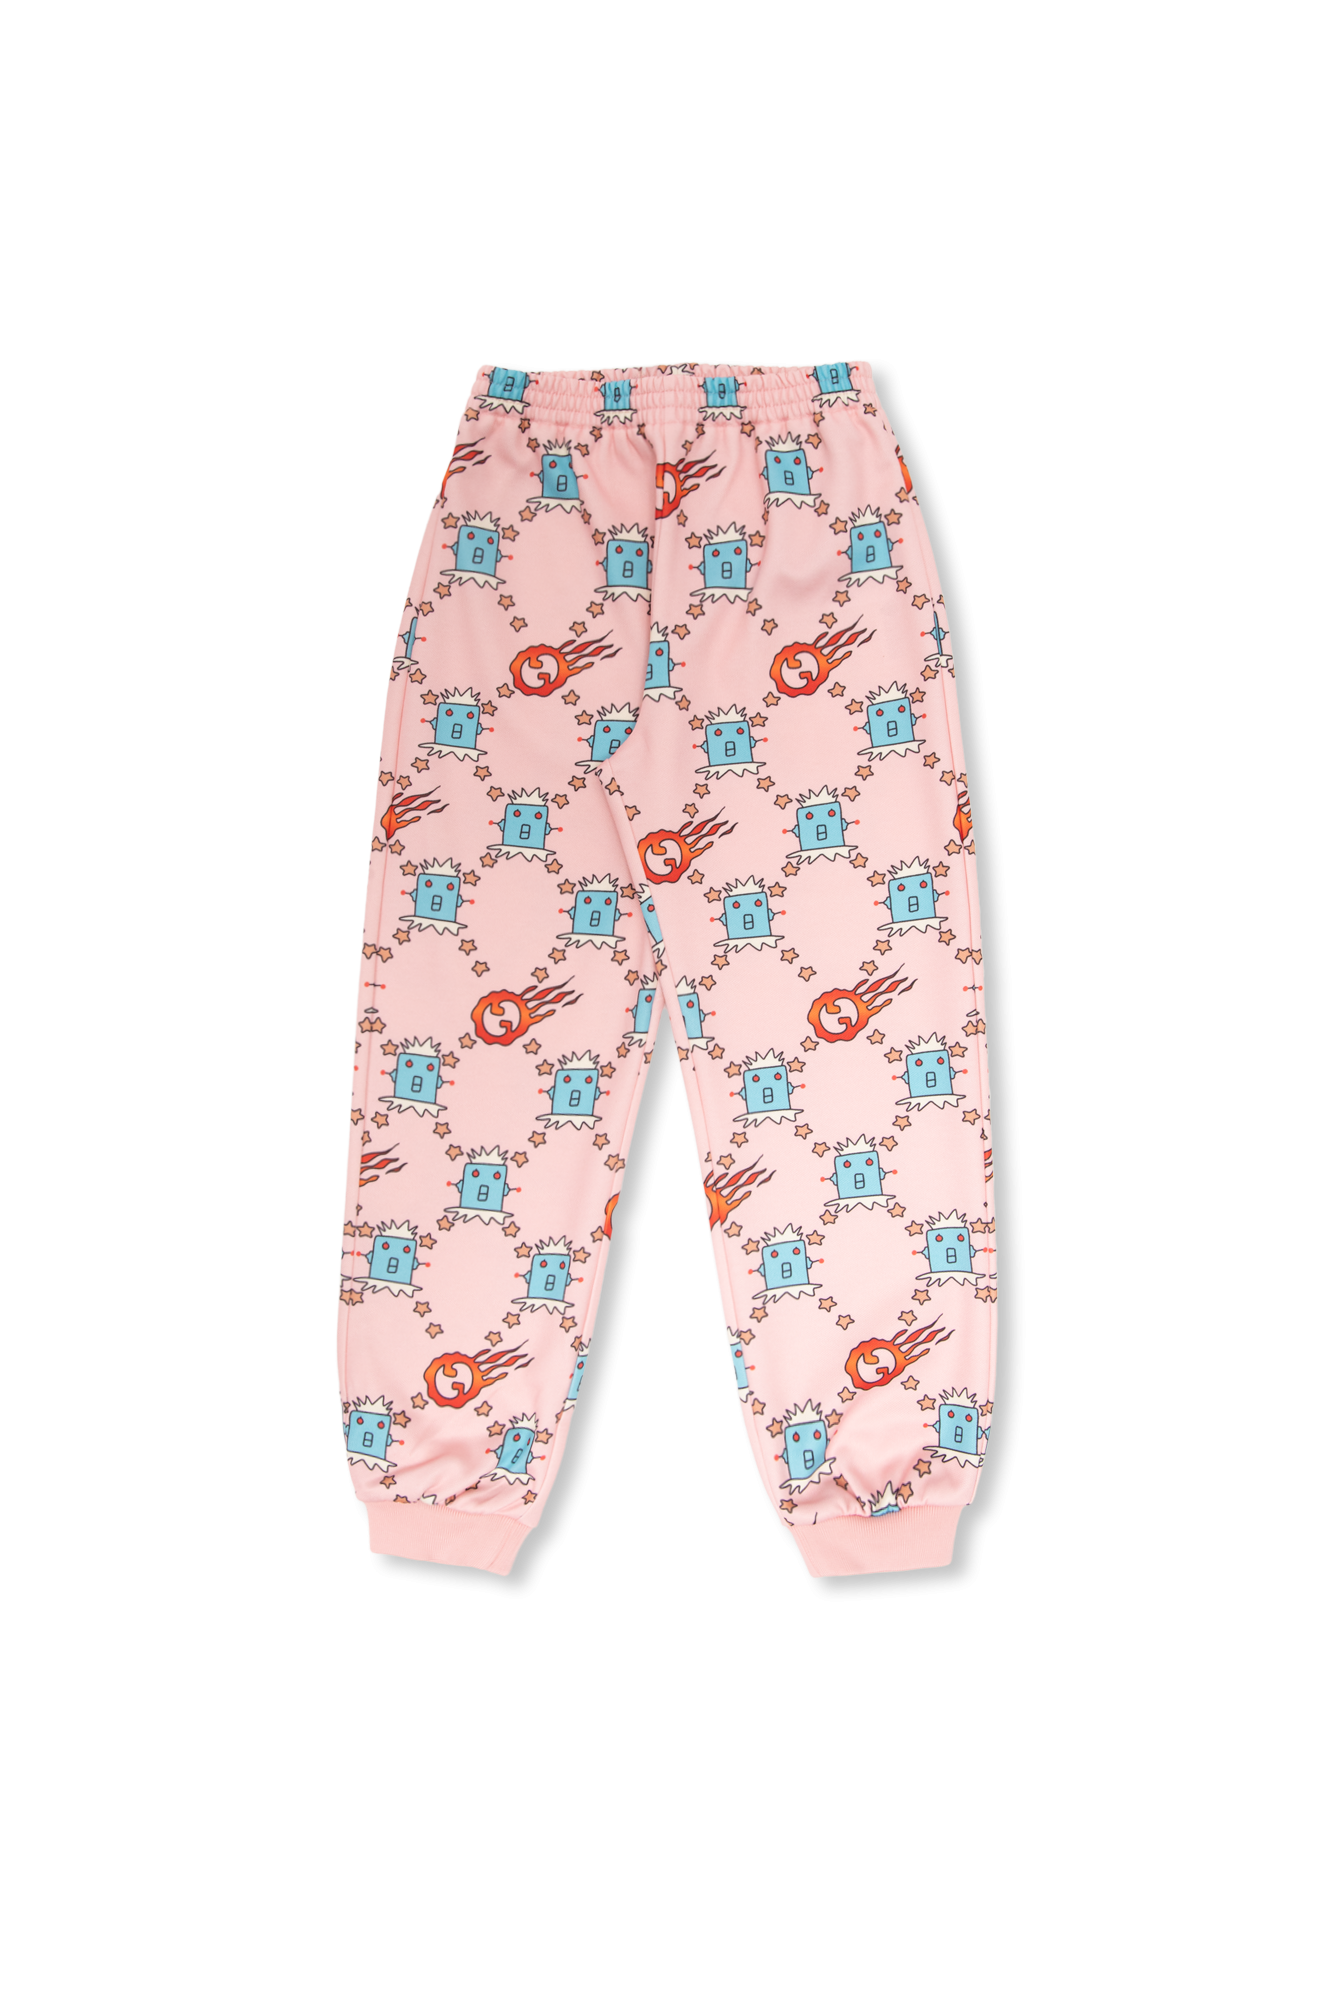 Louis Vuitton Girls clothes 4-14 years